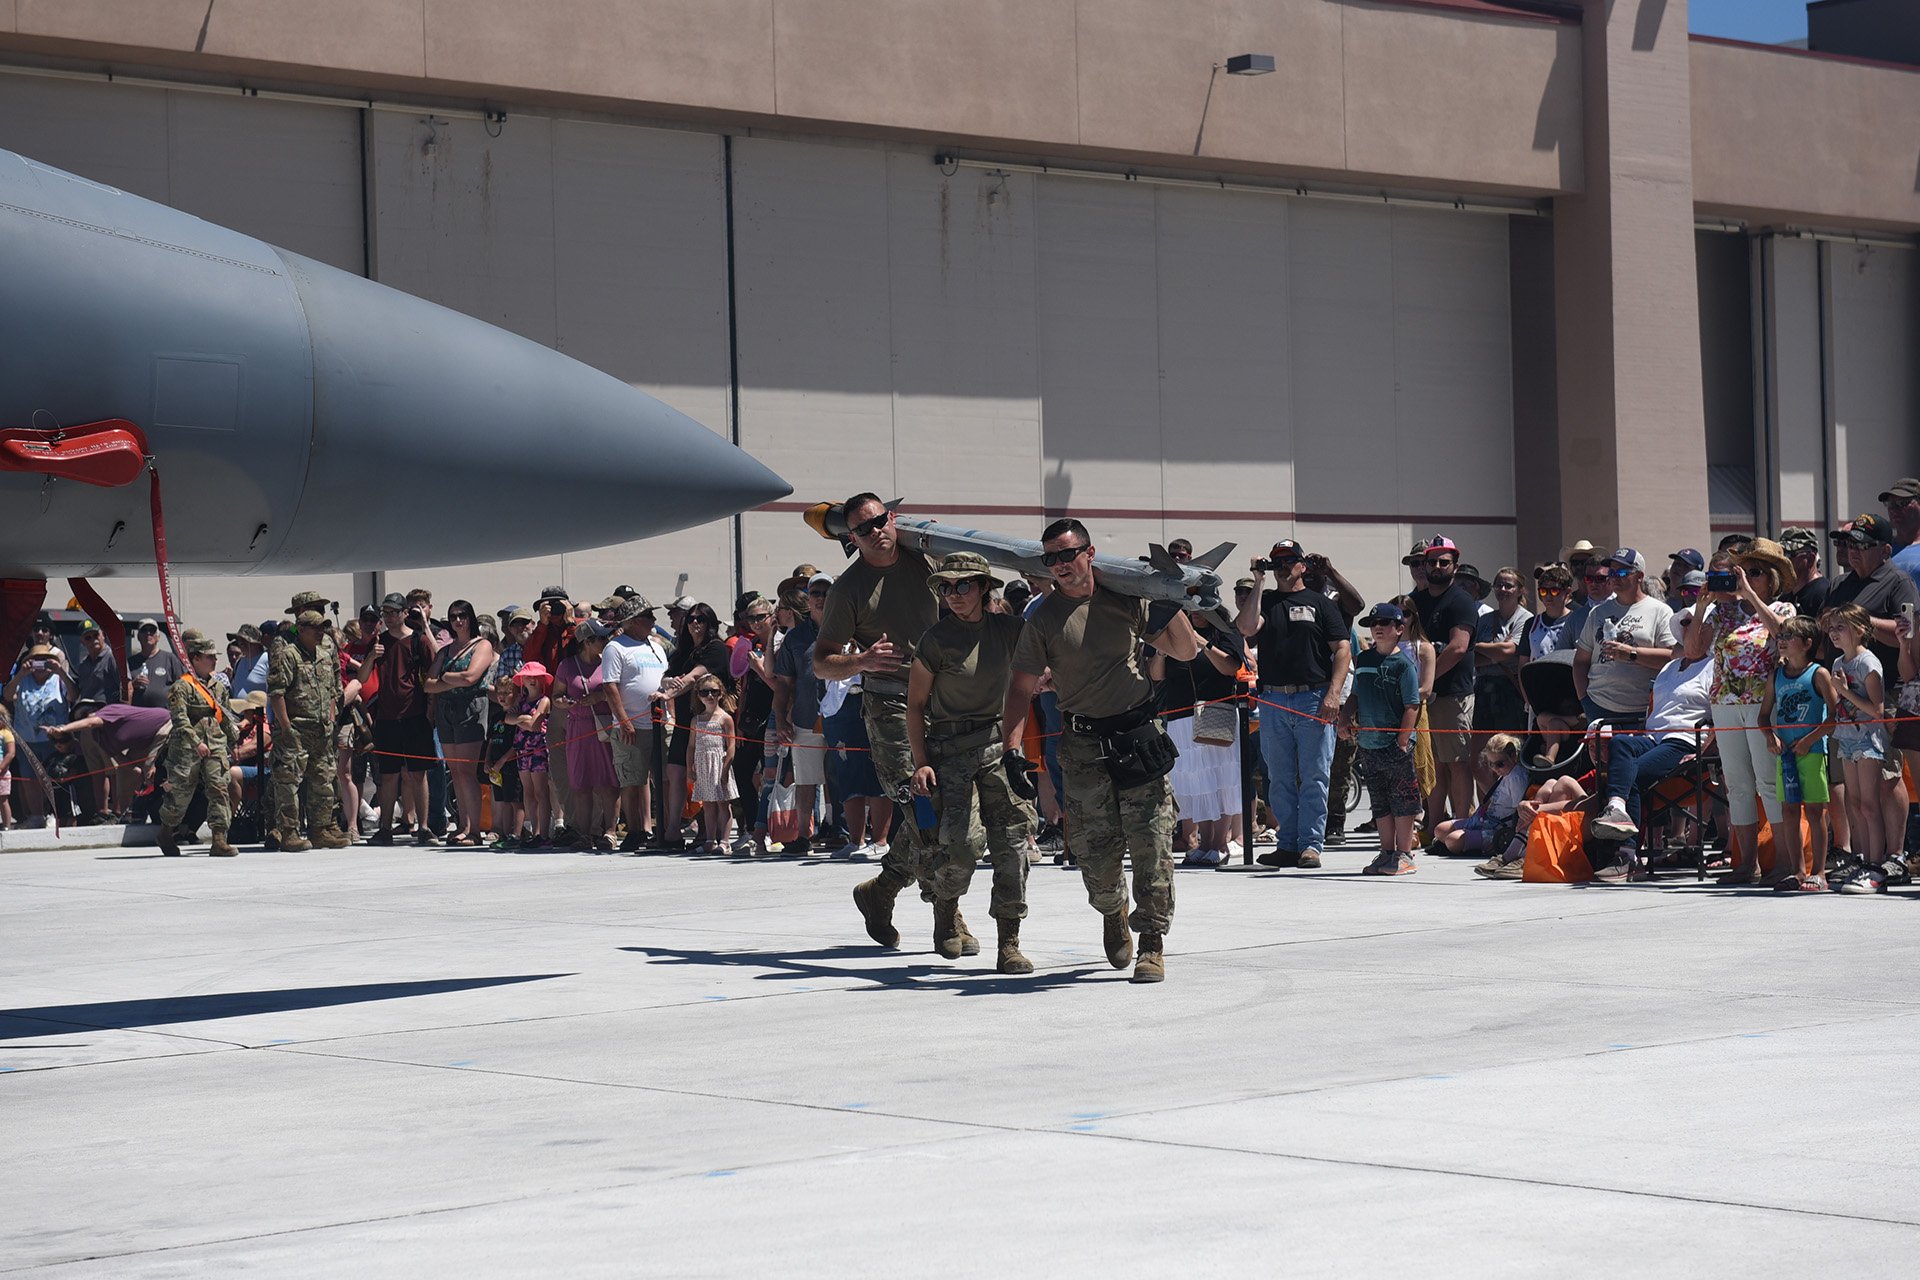  U.S. Air Force Master Sgt. Timothy Saindon, Tech. Sgt. Ashley Vela, and Staff Sgt. Philip Snoozy, all of the 173rd Fighter Wing weapons shop, demonstrate weapons-loading skills for assembled spectators at the Sentry Eagle 2022 open house at Kingsley